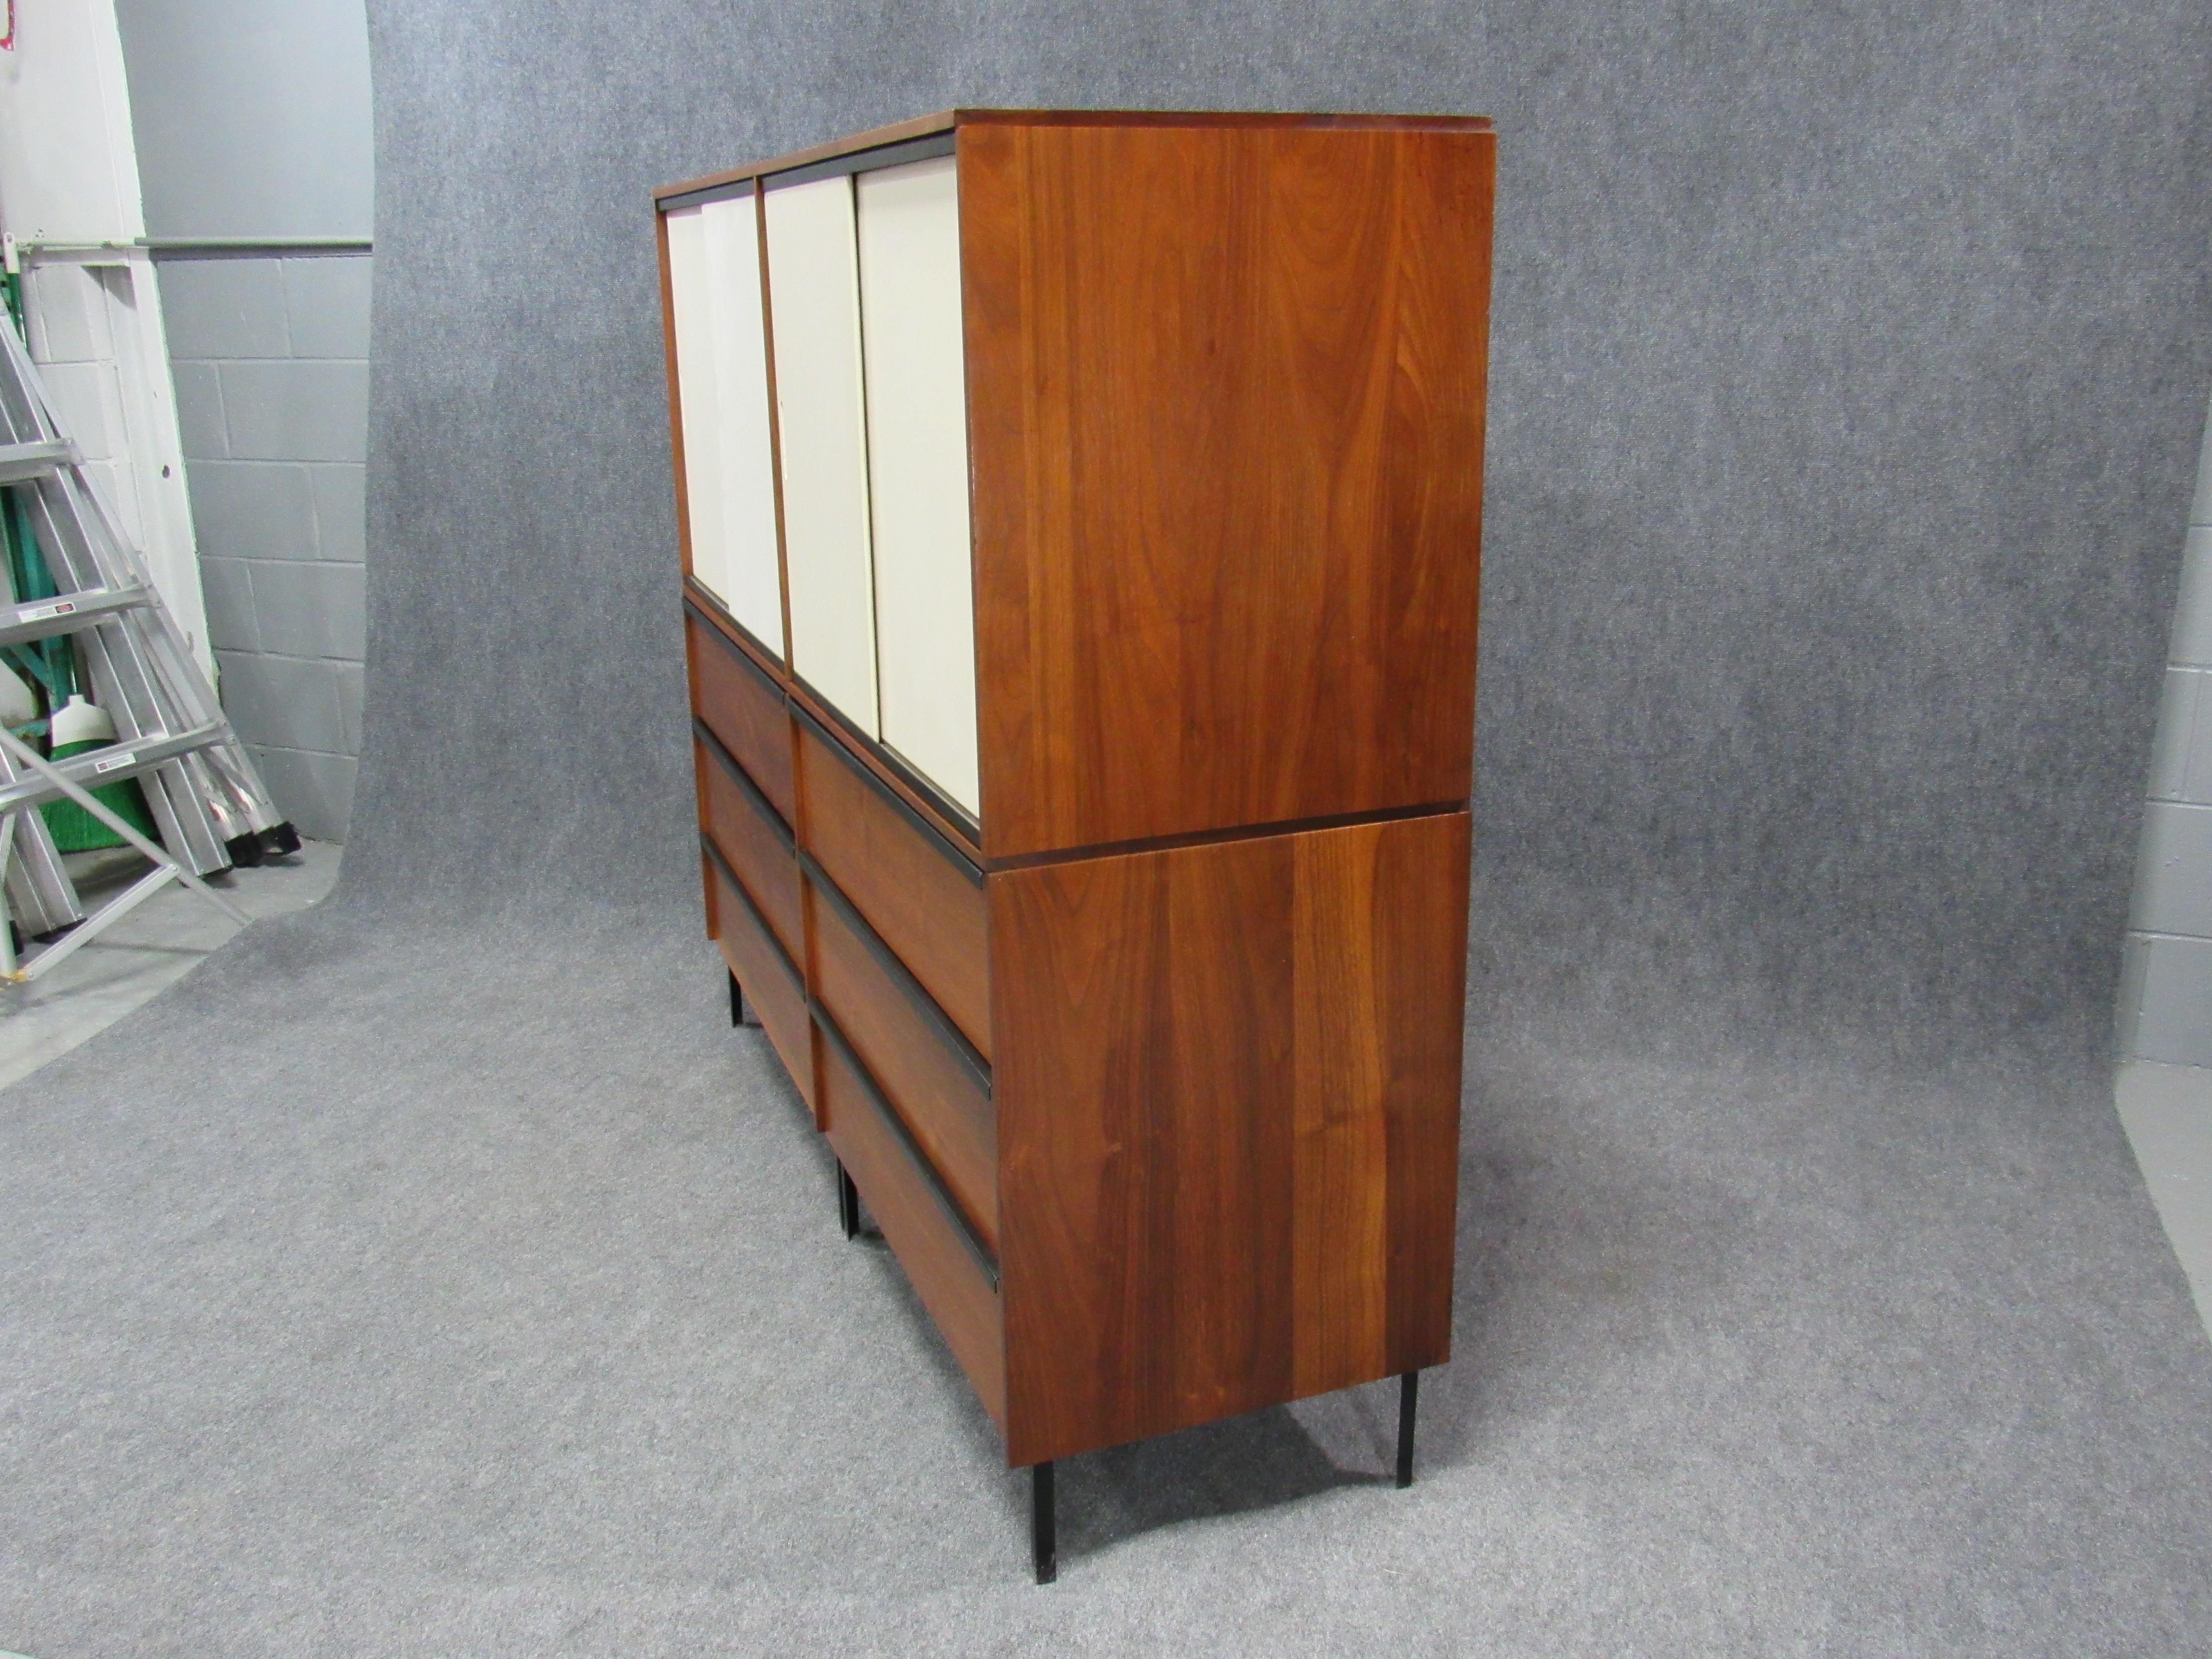 Midcentury solid walnut 2-piece multi-functional chest of drawers / credenda / cupboard attributed to D.R. Bates for Vista of California. Top cupboard unit measures 61